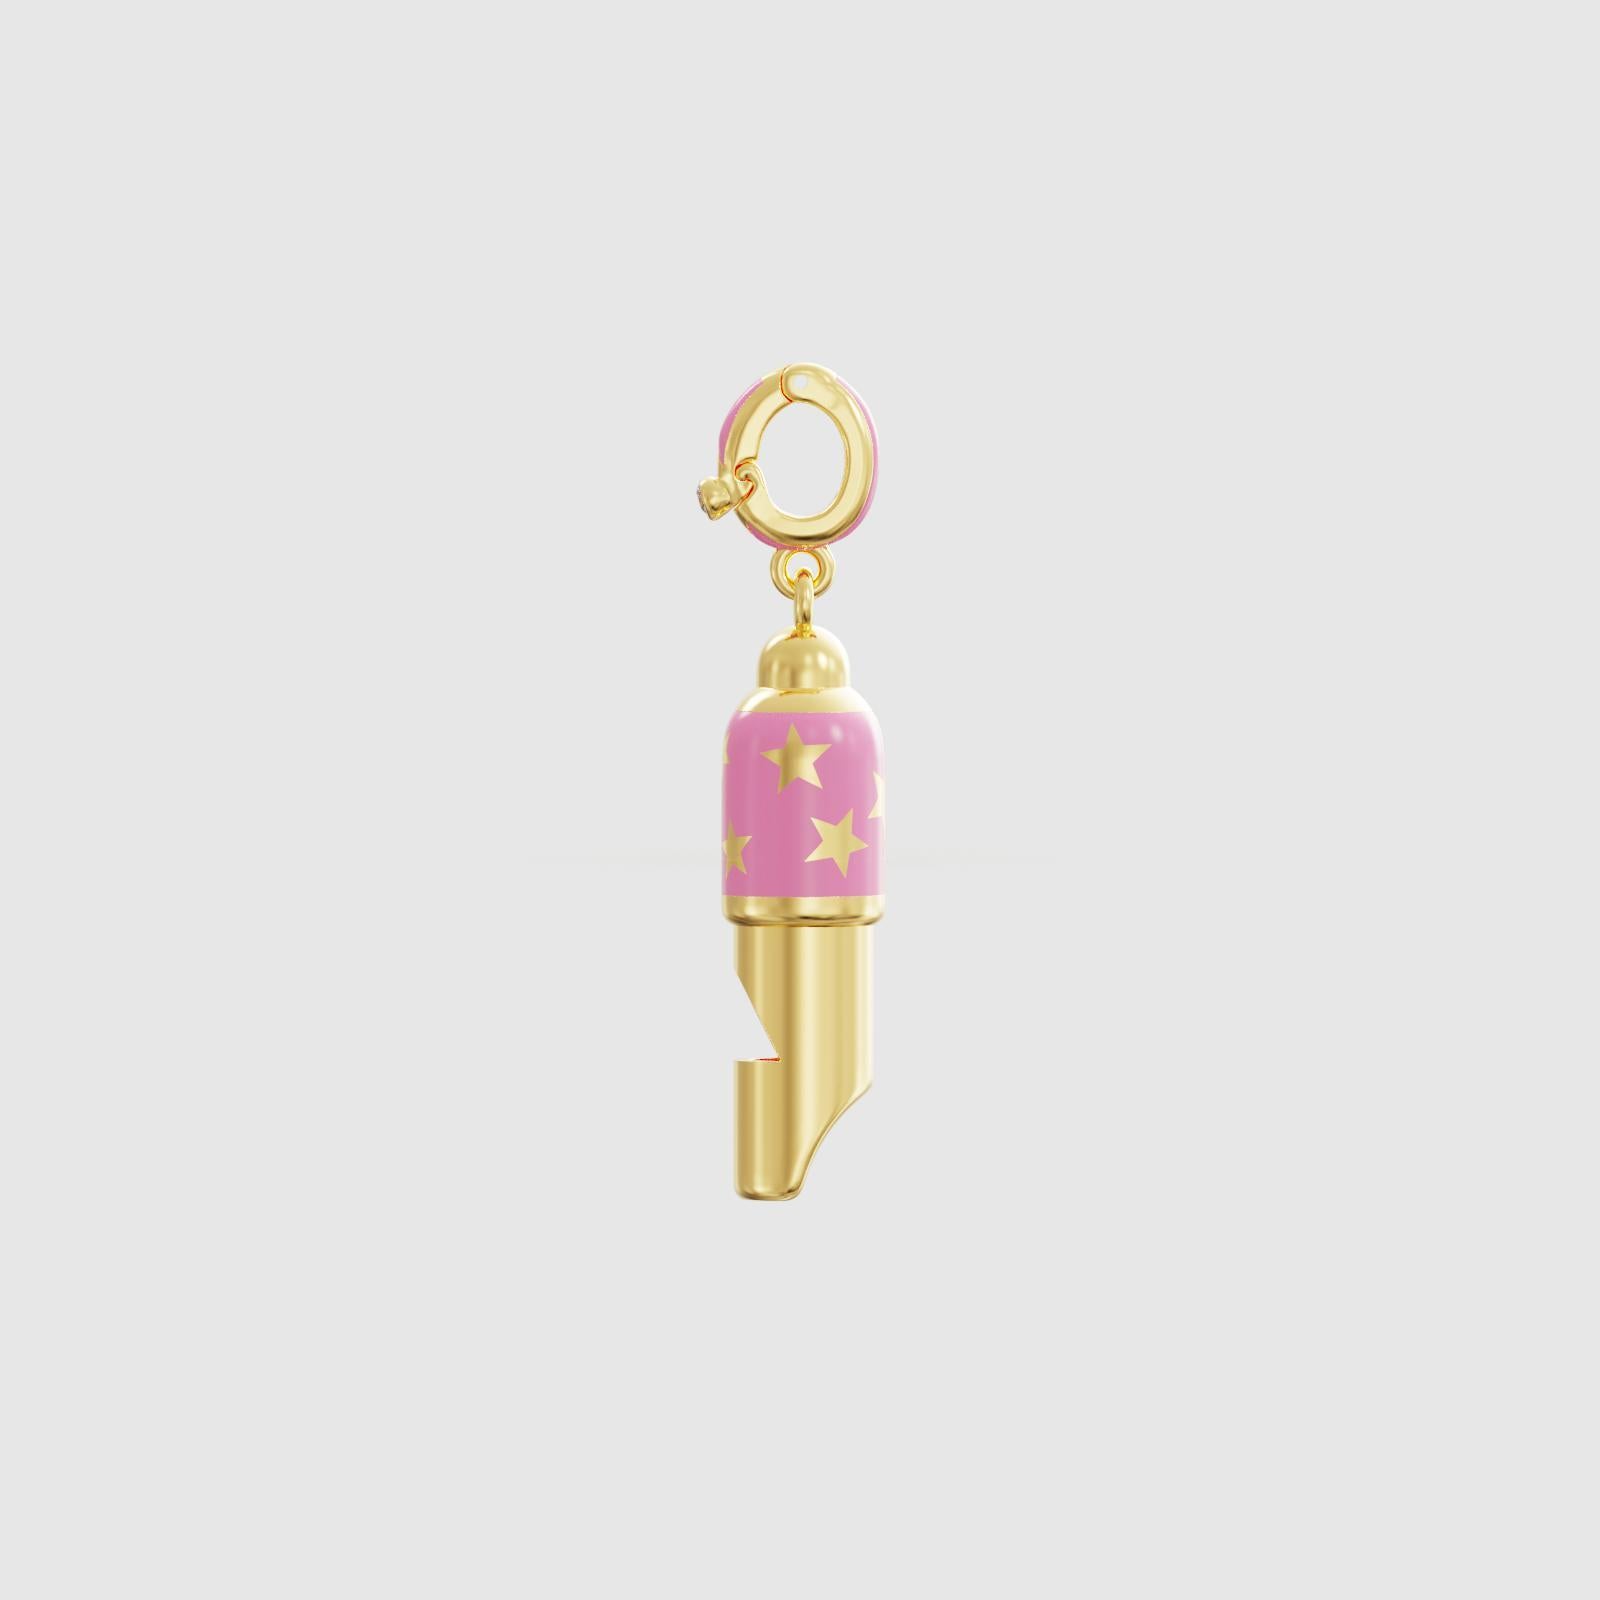 Brilliant Cut Small Gold Whistle Pendant Necklace, Pink Enamel For Sale